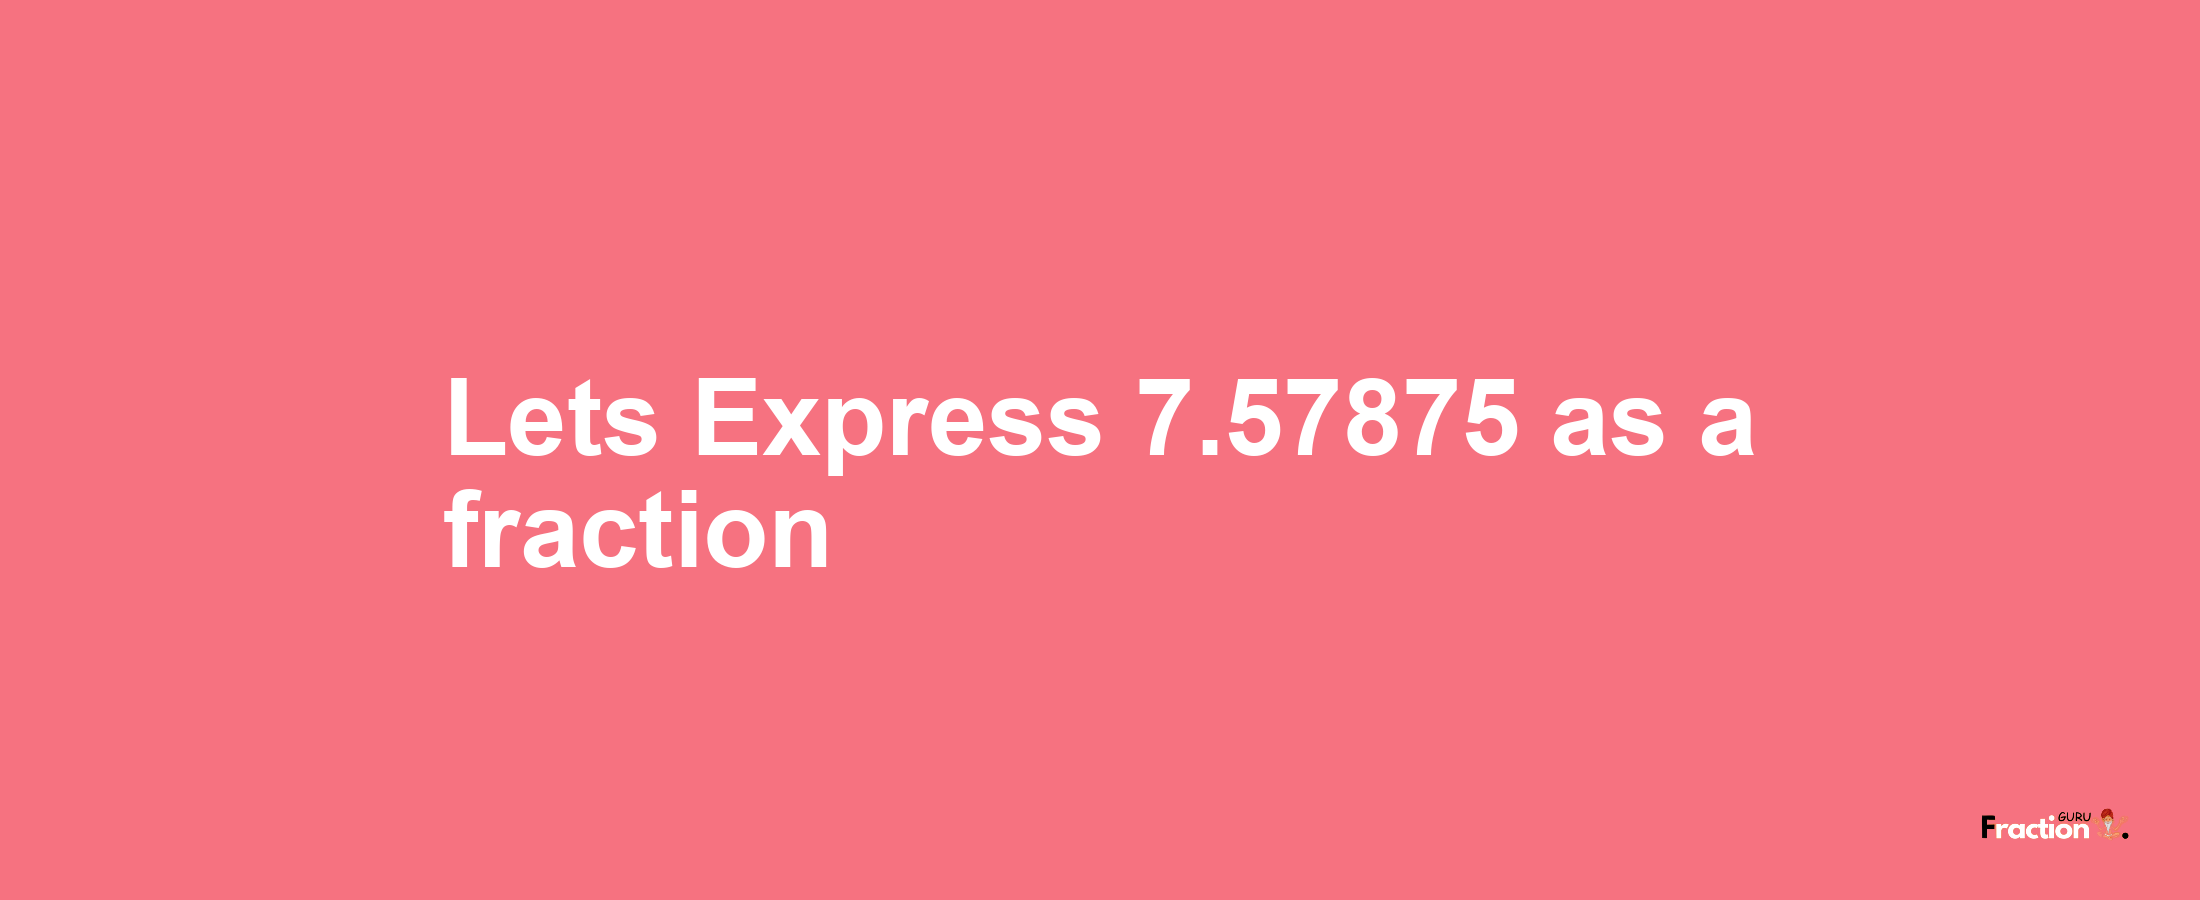 Lets Express 7.57875 as afraction